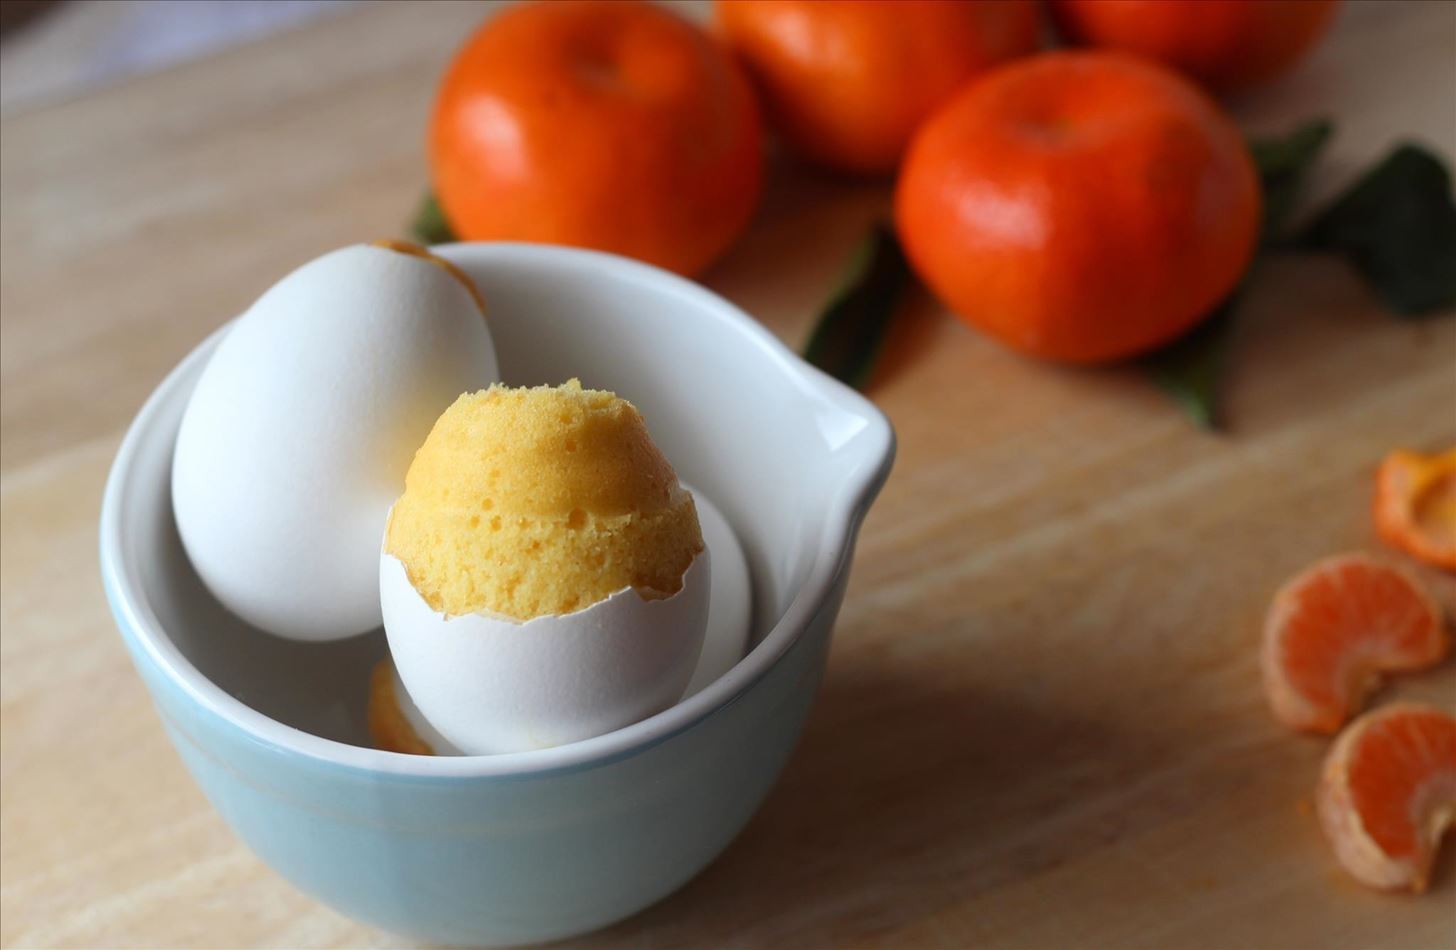 Bake Cake in Real Eggshells for April Fool's Day or Easter